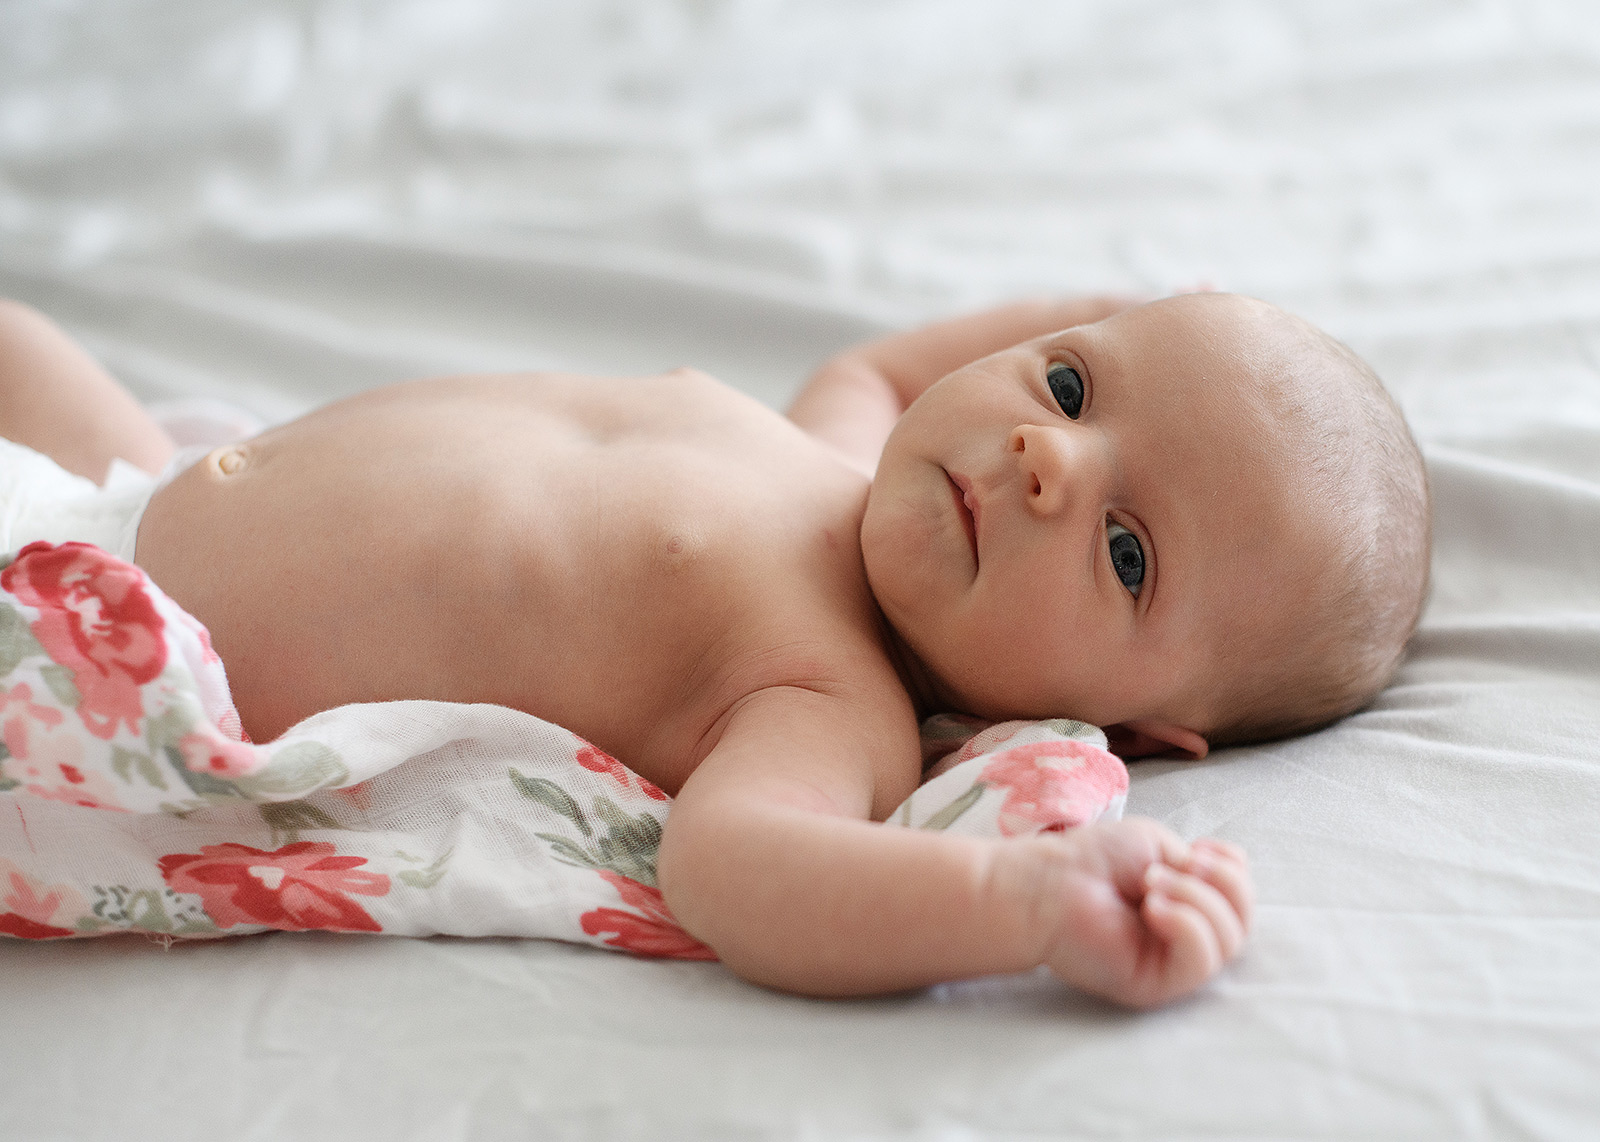 Newborn baby girl on floral swaddle on bed